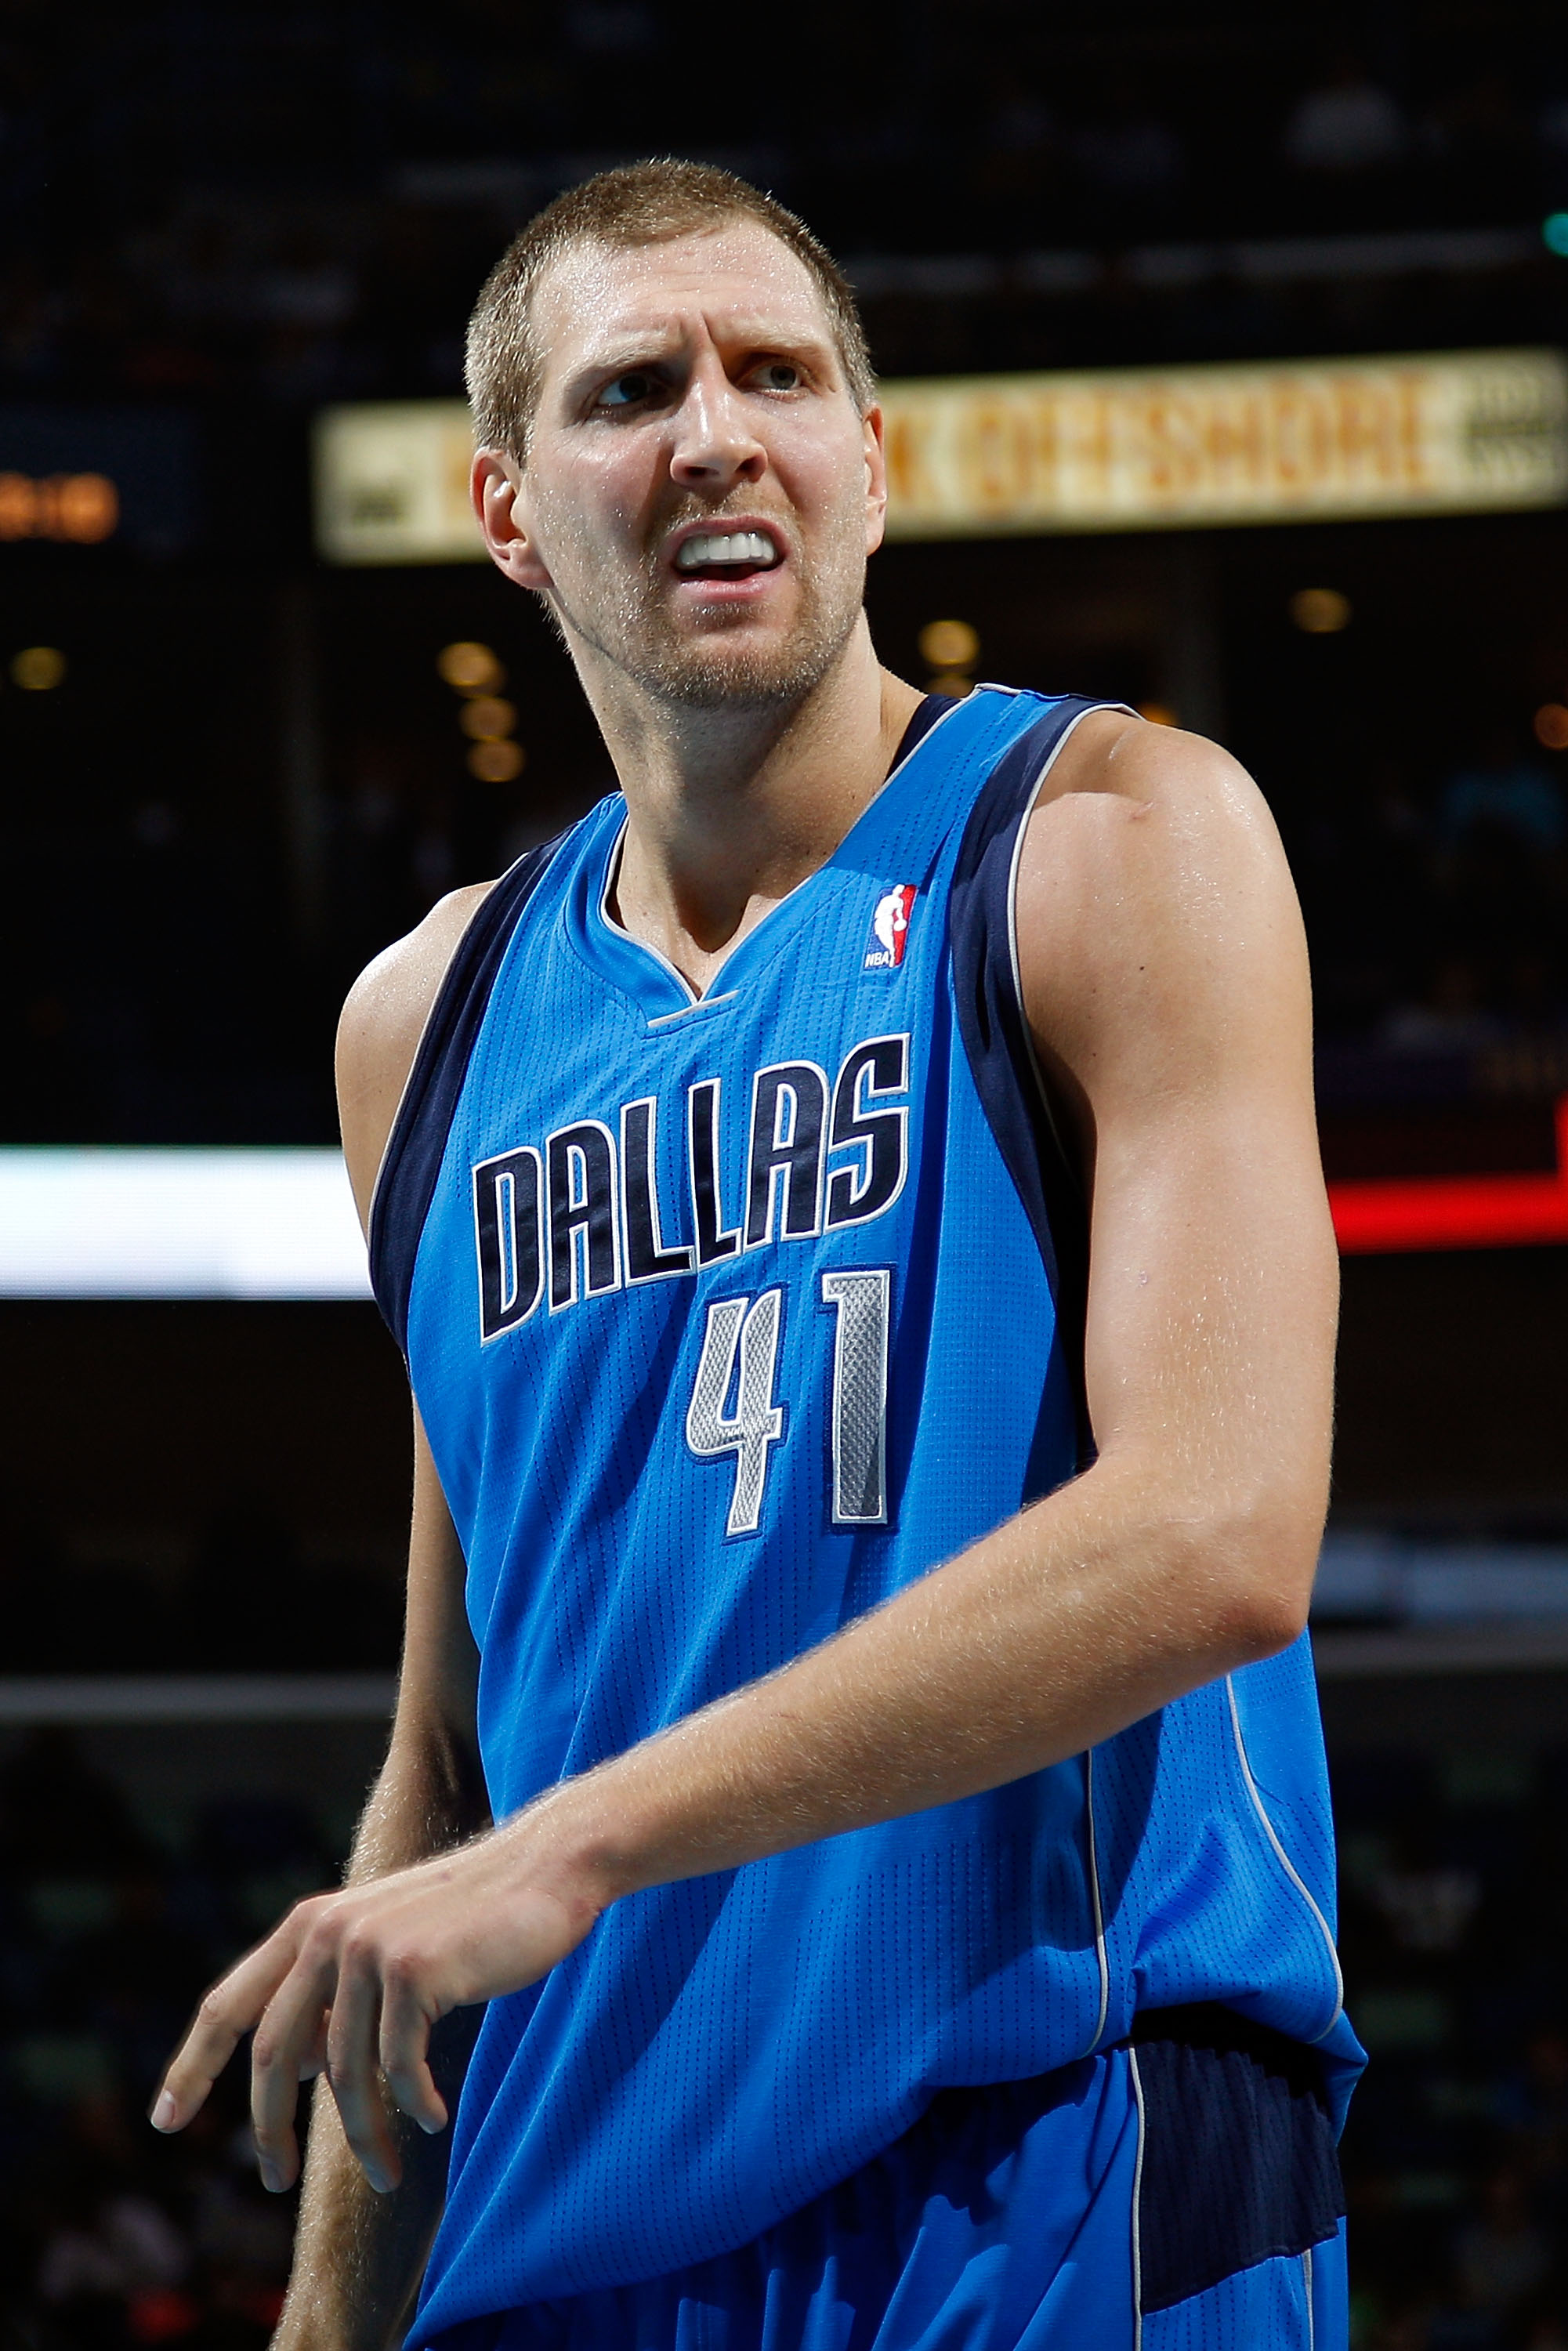 NEW ORLEANS - NOVEMBER 17:  Dirk Nowitzki #41 of the Dallas Mavericks reacts to a call during the game against the New Orleans Hornets at the New Orleans Arena on November 17, 2010 in New Orleans, Louisiana.  The Hornets defeated the Mavericks 99-97.  NOT